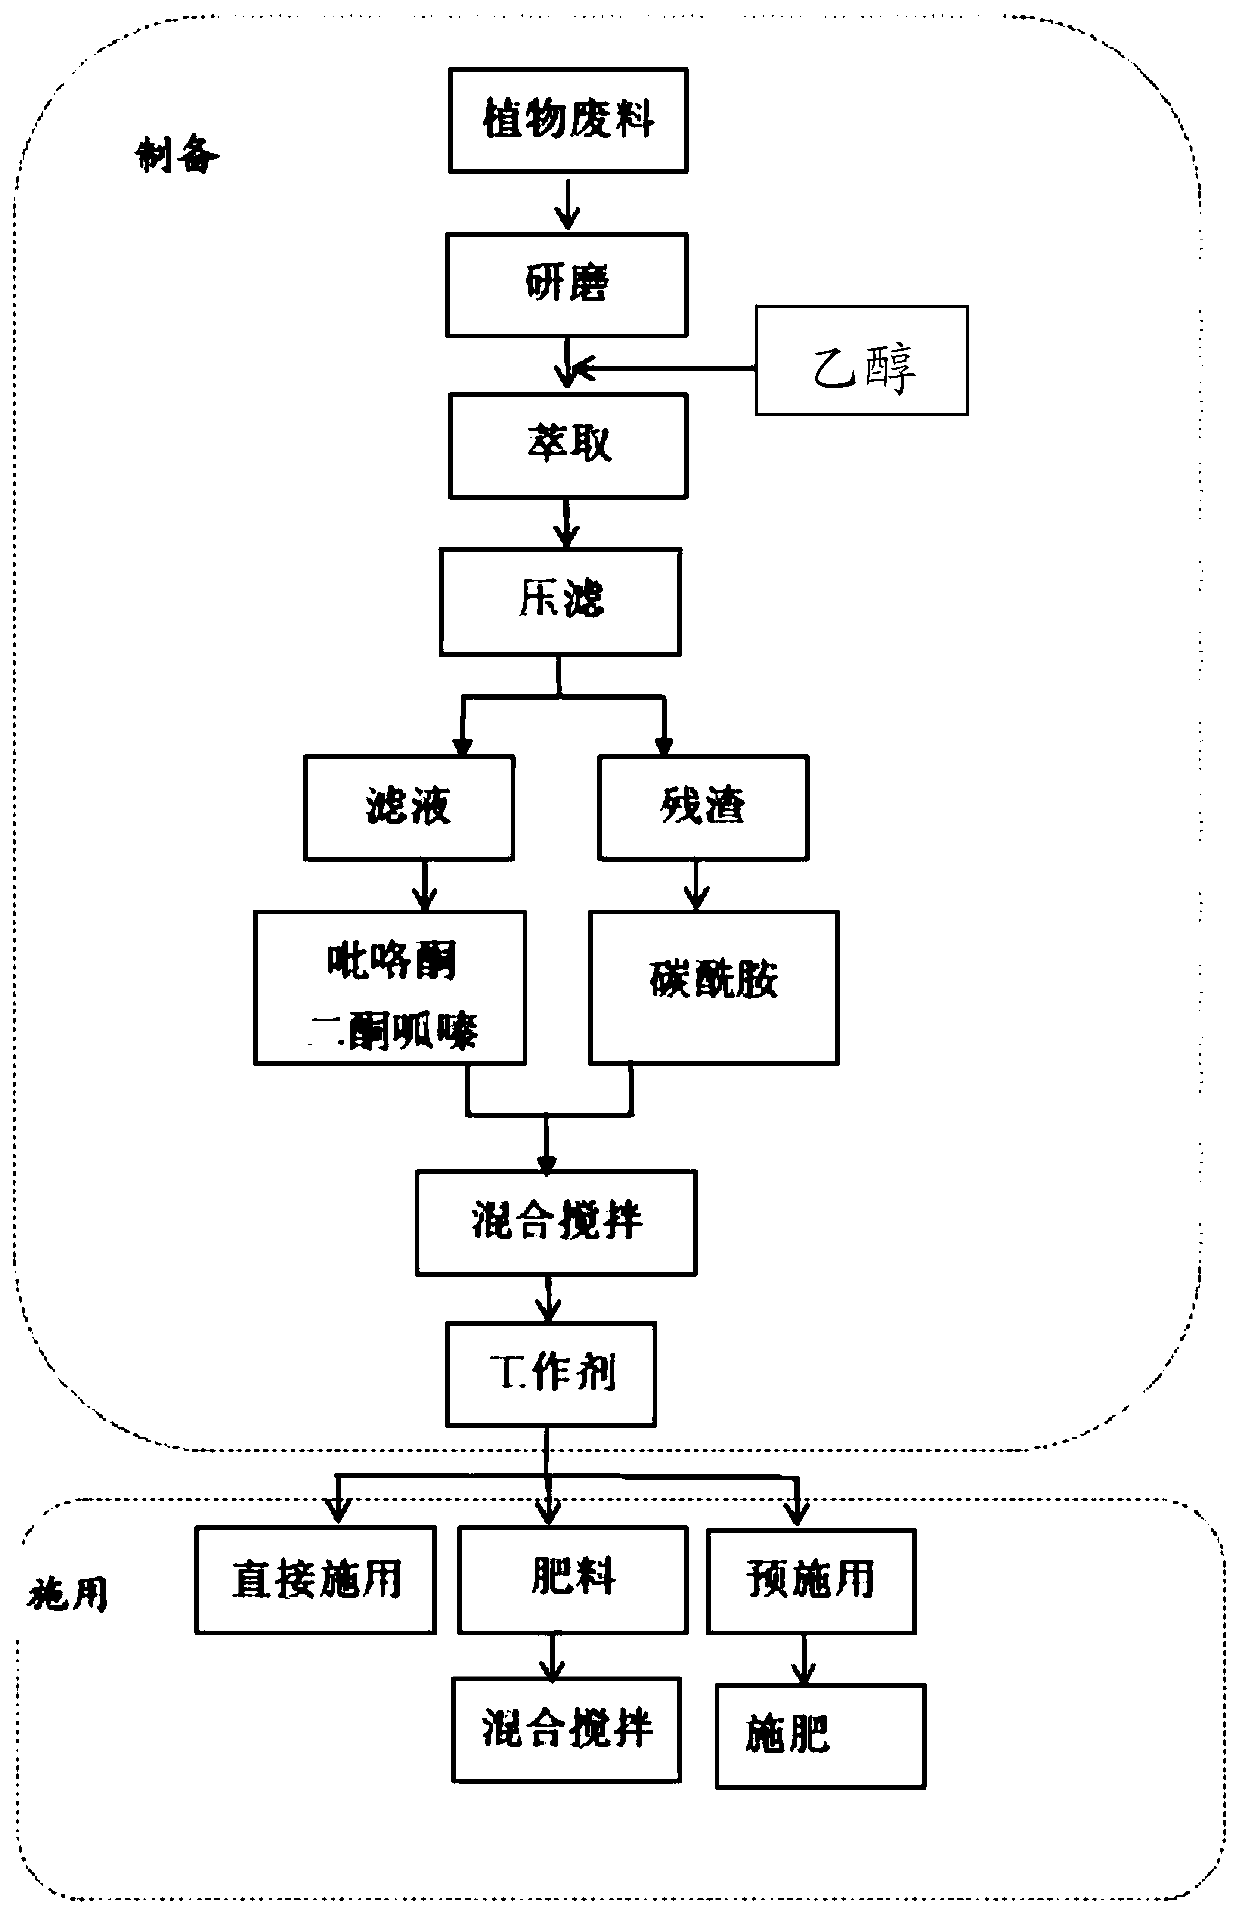 Agent for soil antibiotic resistance gene pollution reduction and its preparation and application